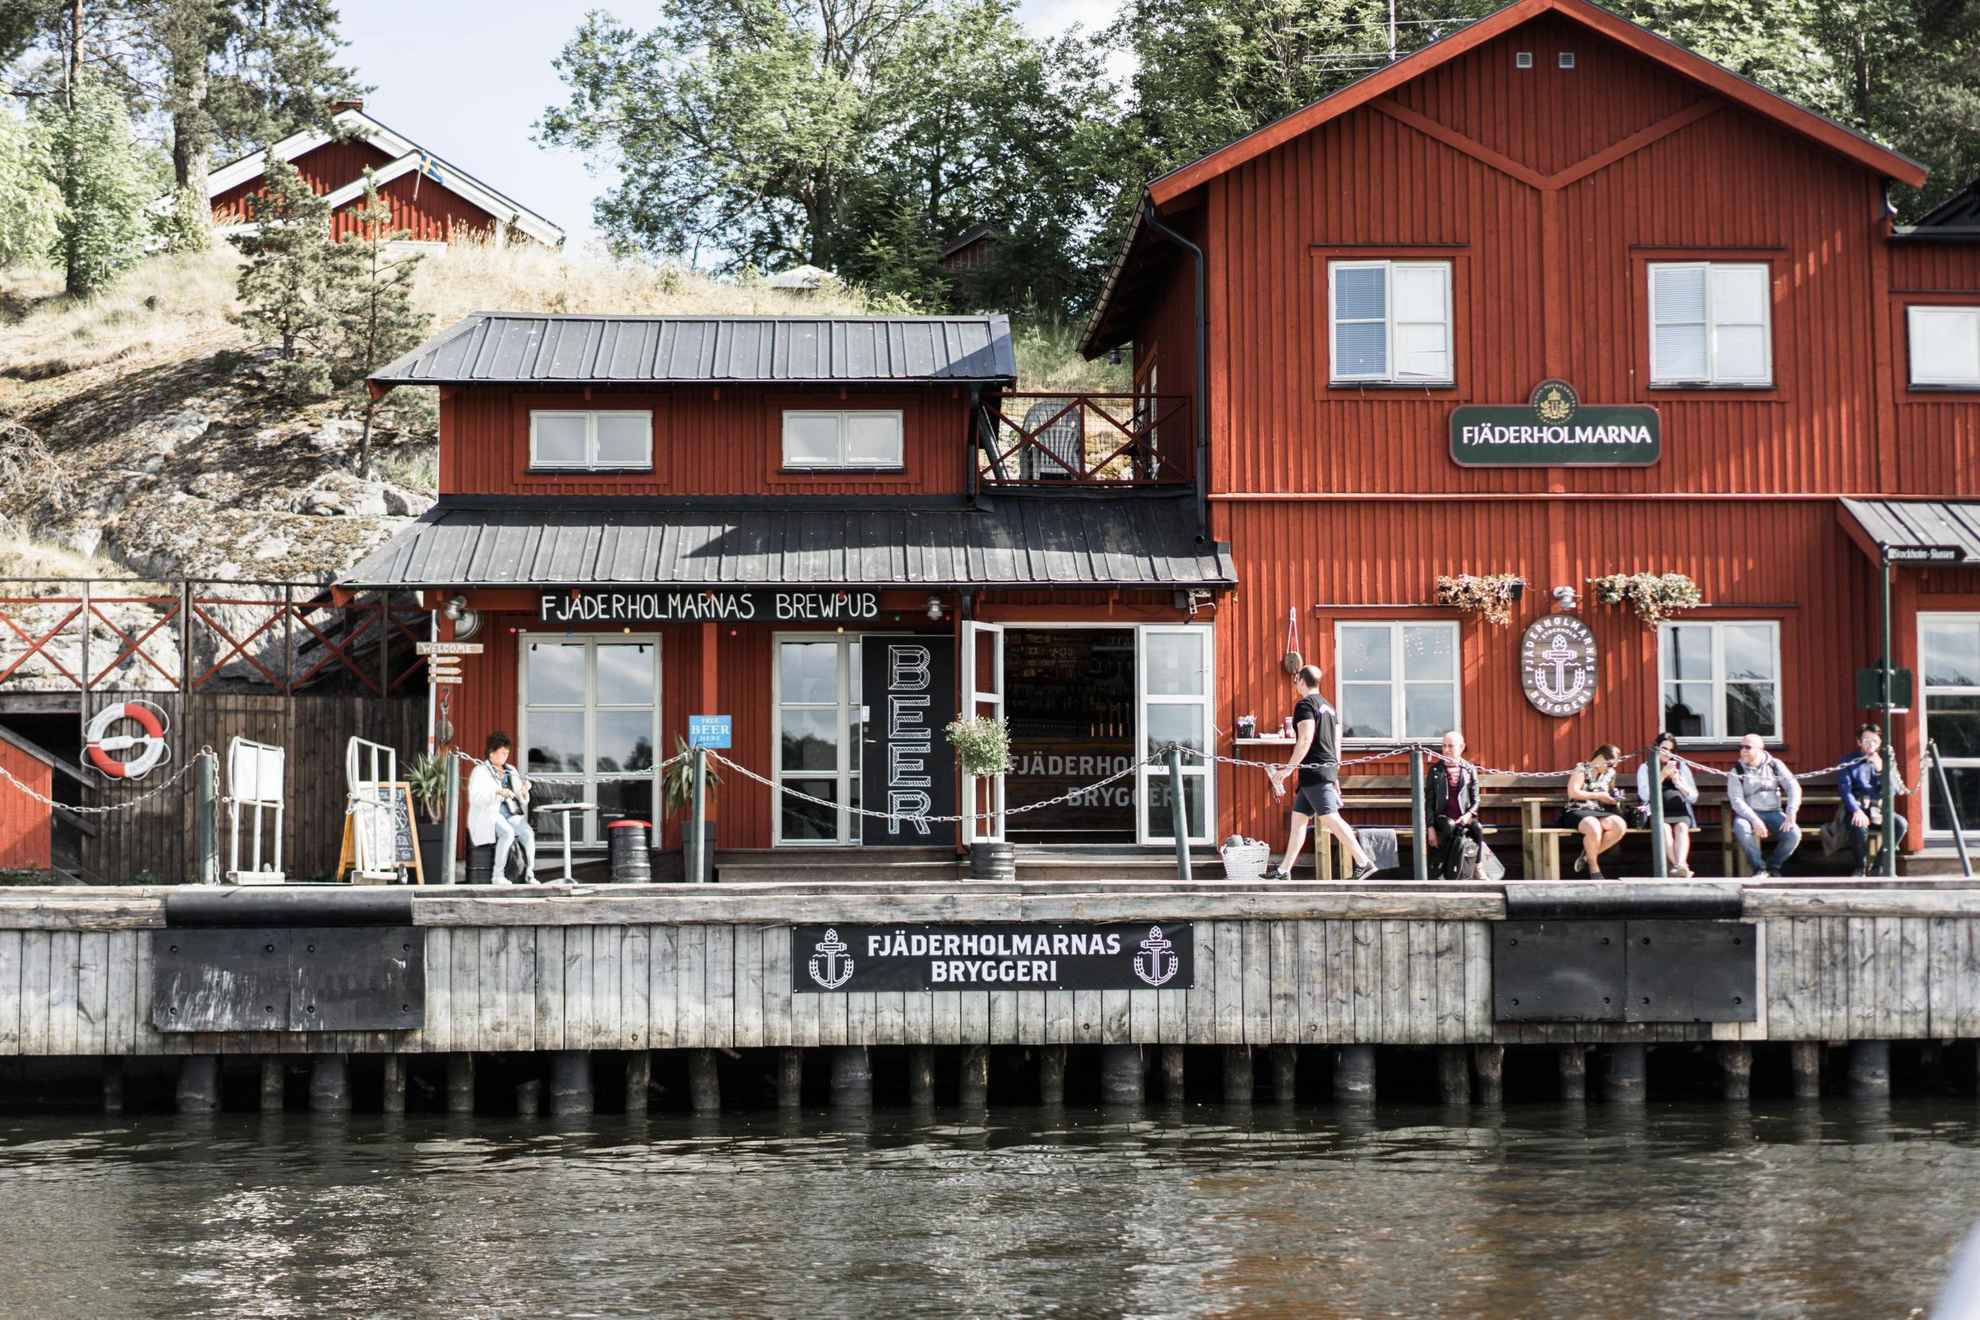 Fjäderholmarnas Brewery and Brewpub, located in a red wooden house at the sea side in the marina. People are sitting on benches outside.